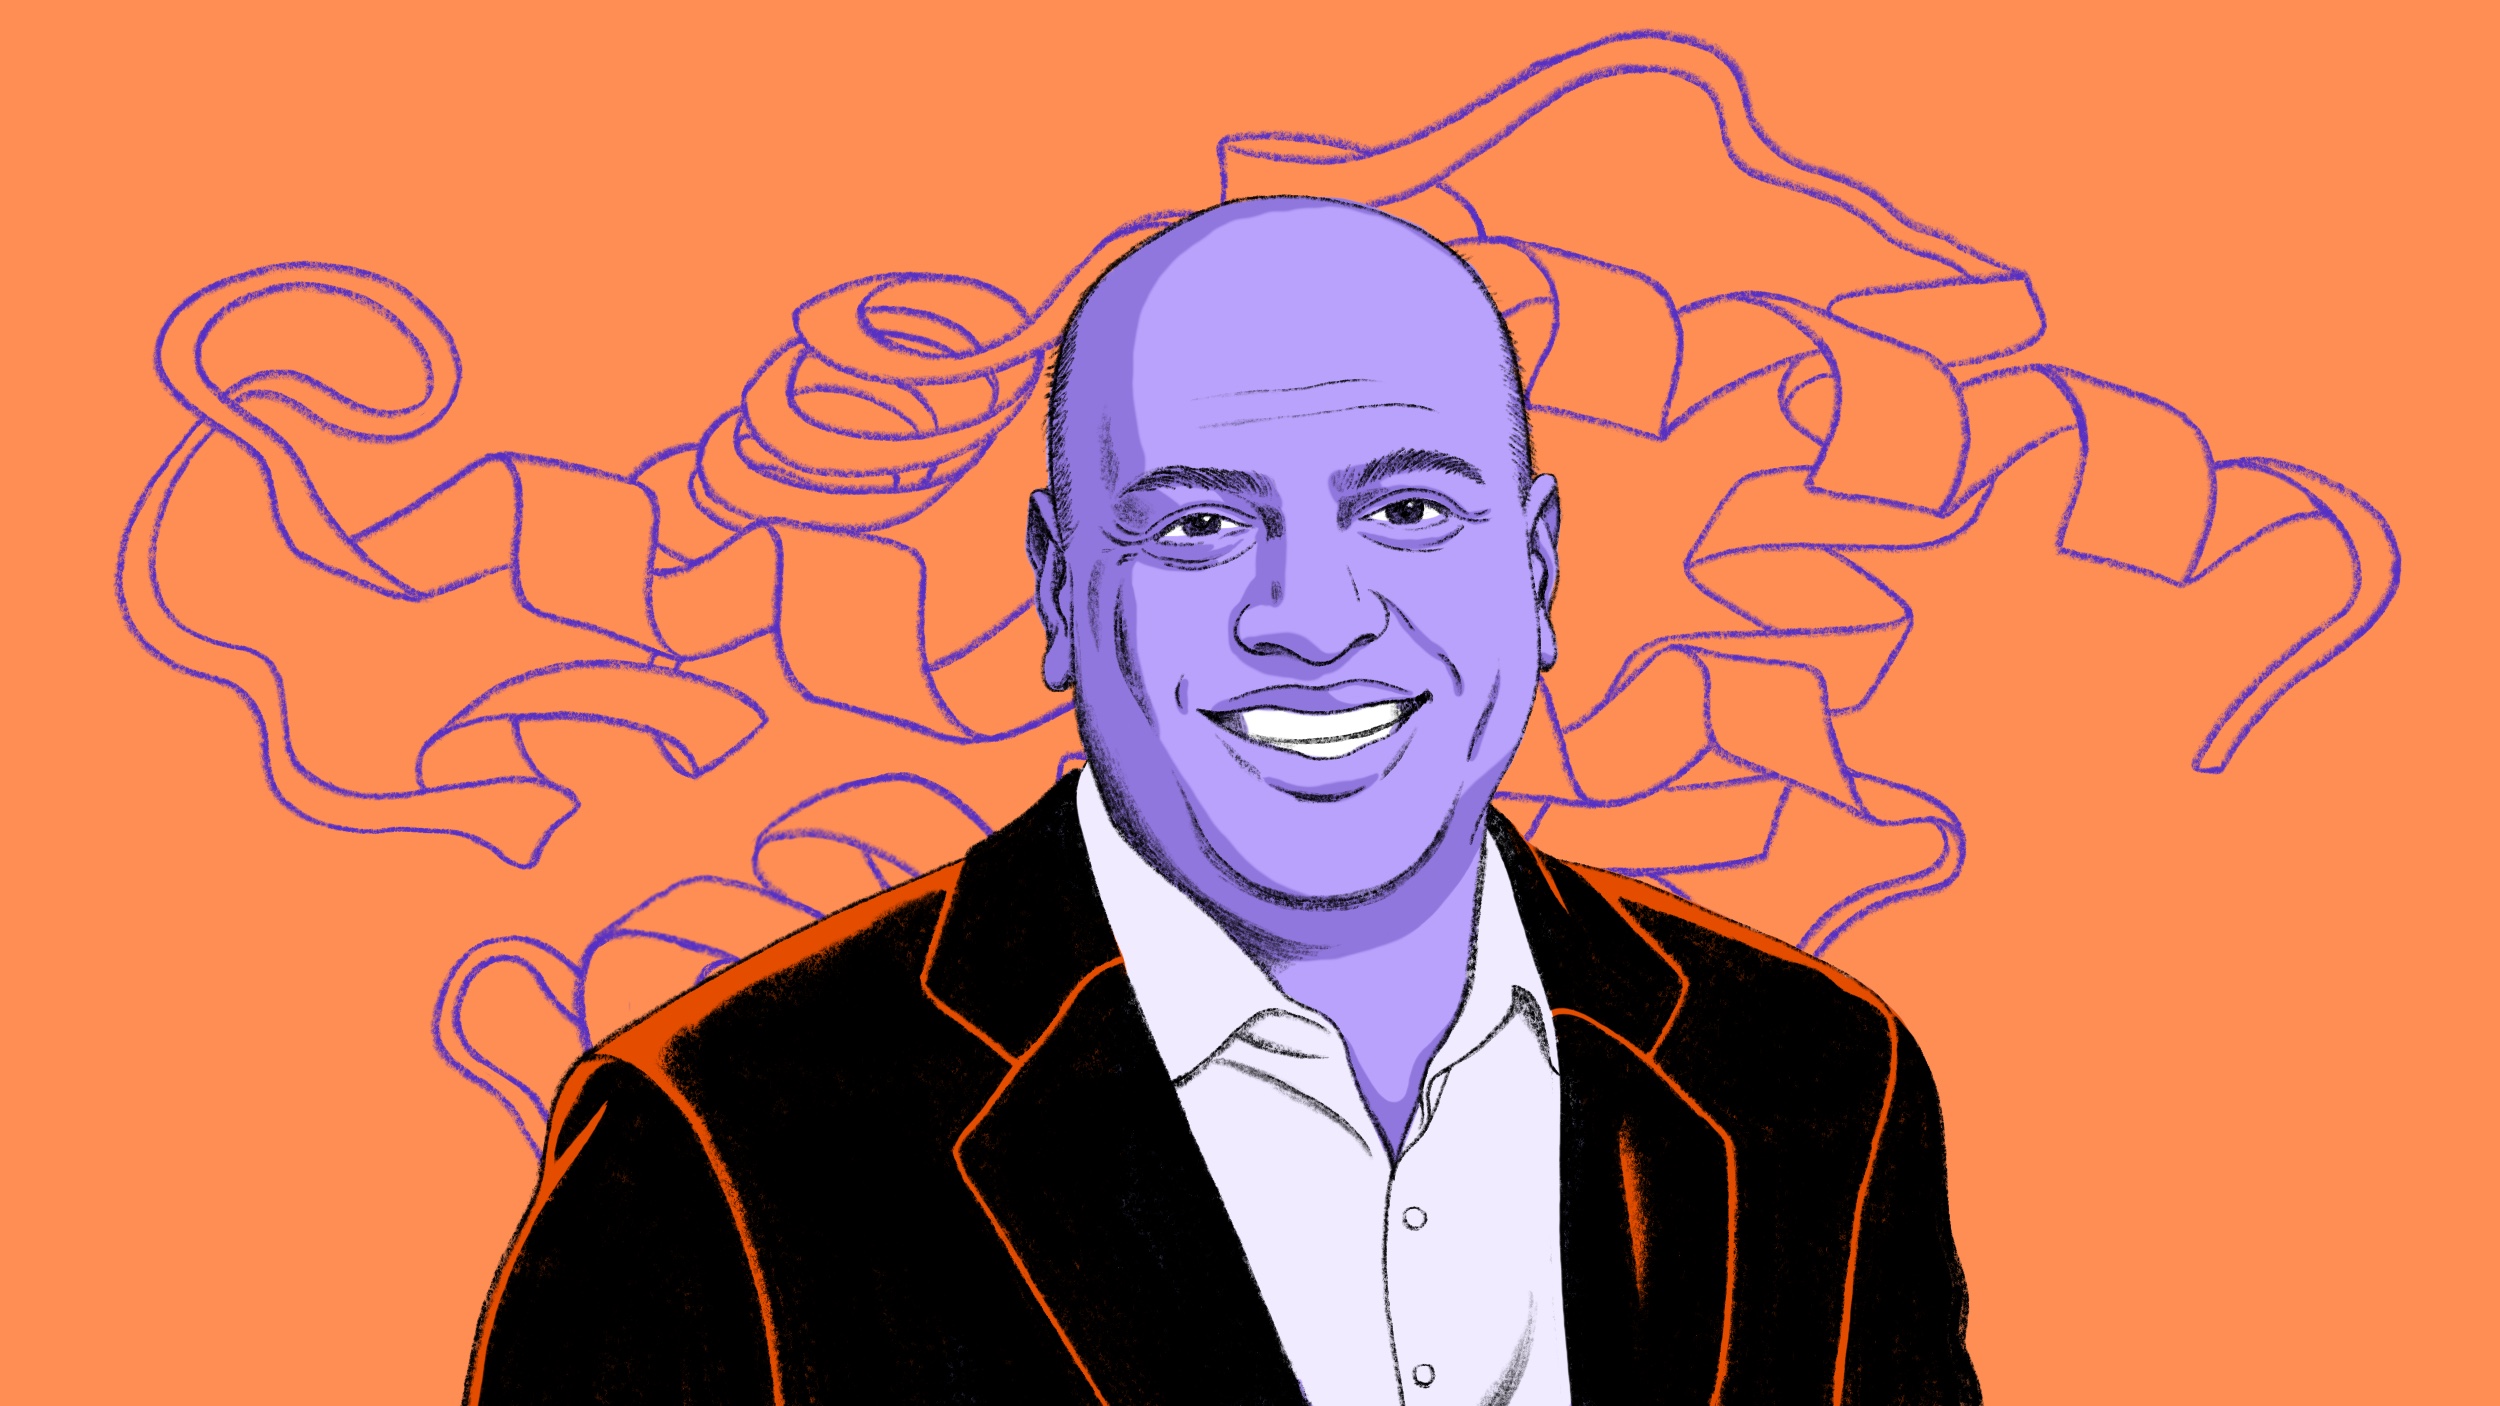 Illustration of a smiling bald man in a suit with a purple complexion against an orange background with ribbon-like shapes.